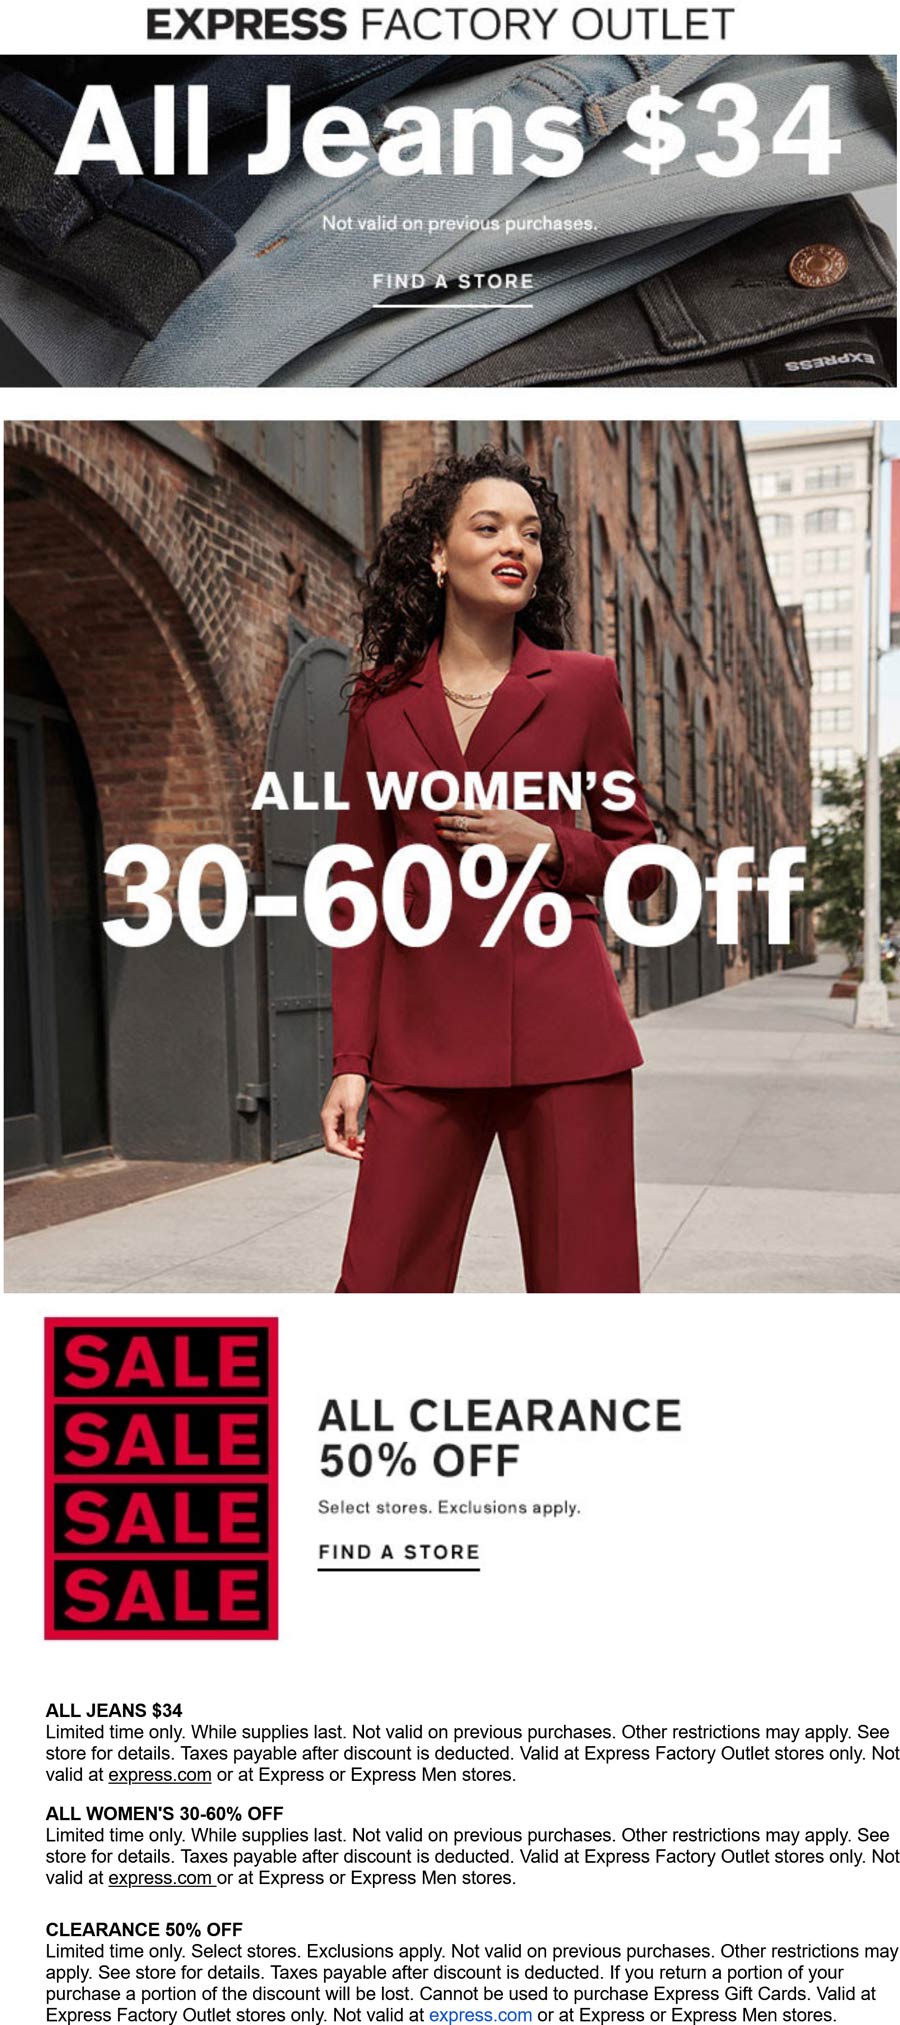 Express Factory Outlet coupons & promo code for [November 2022]